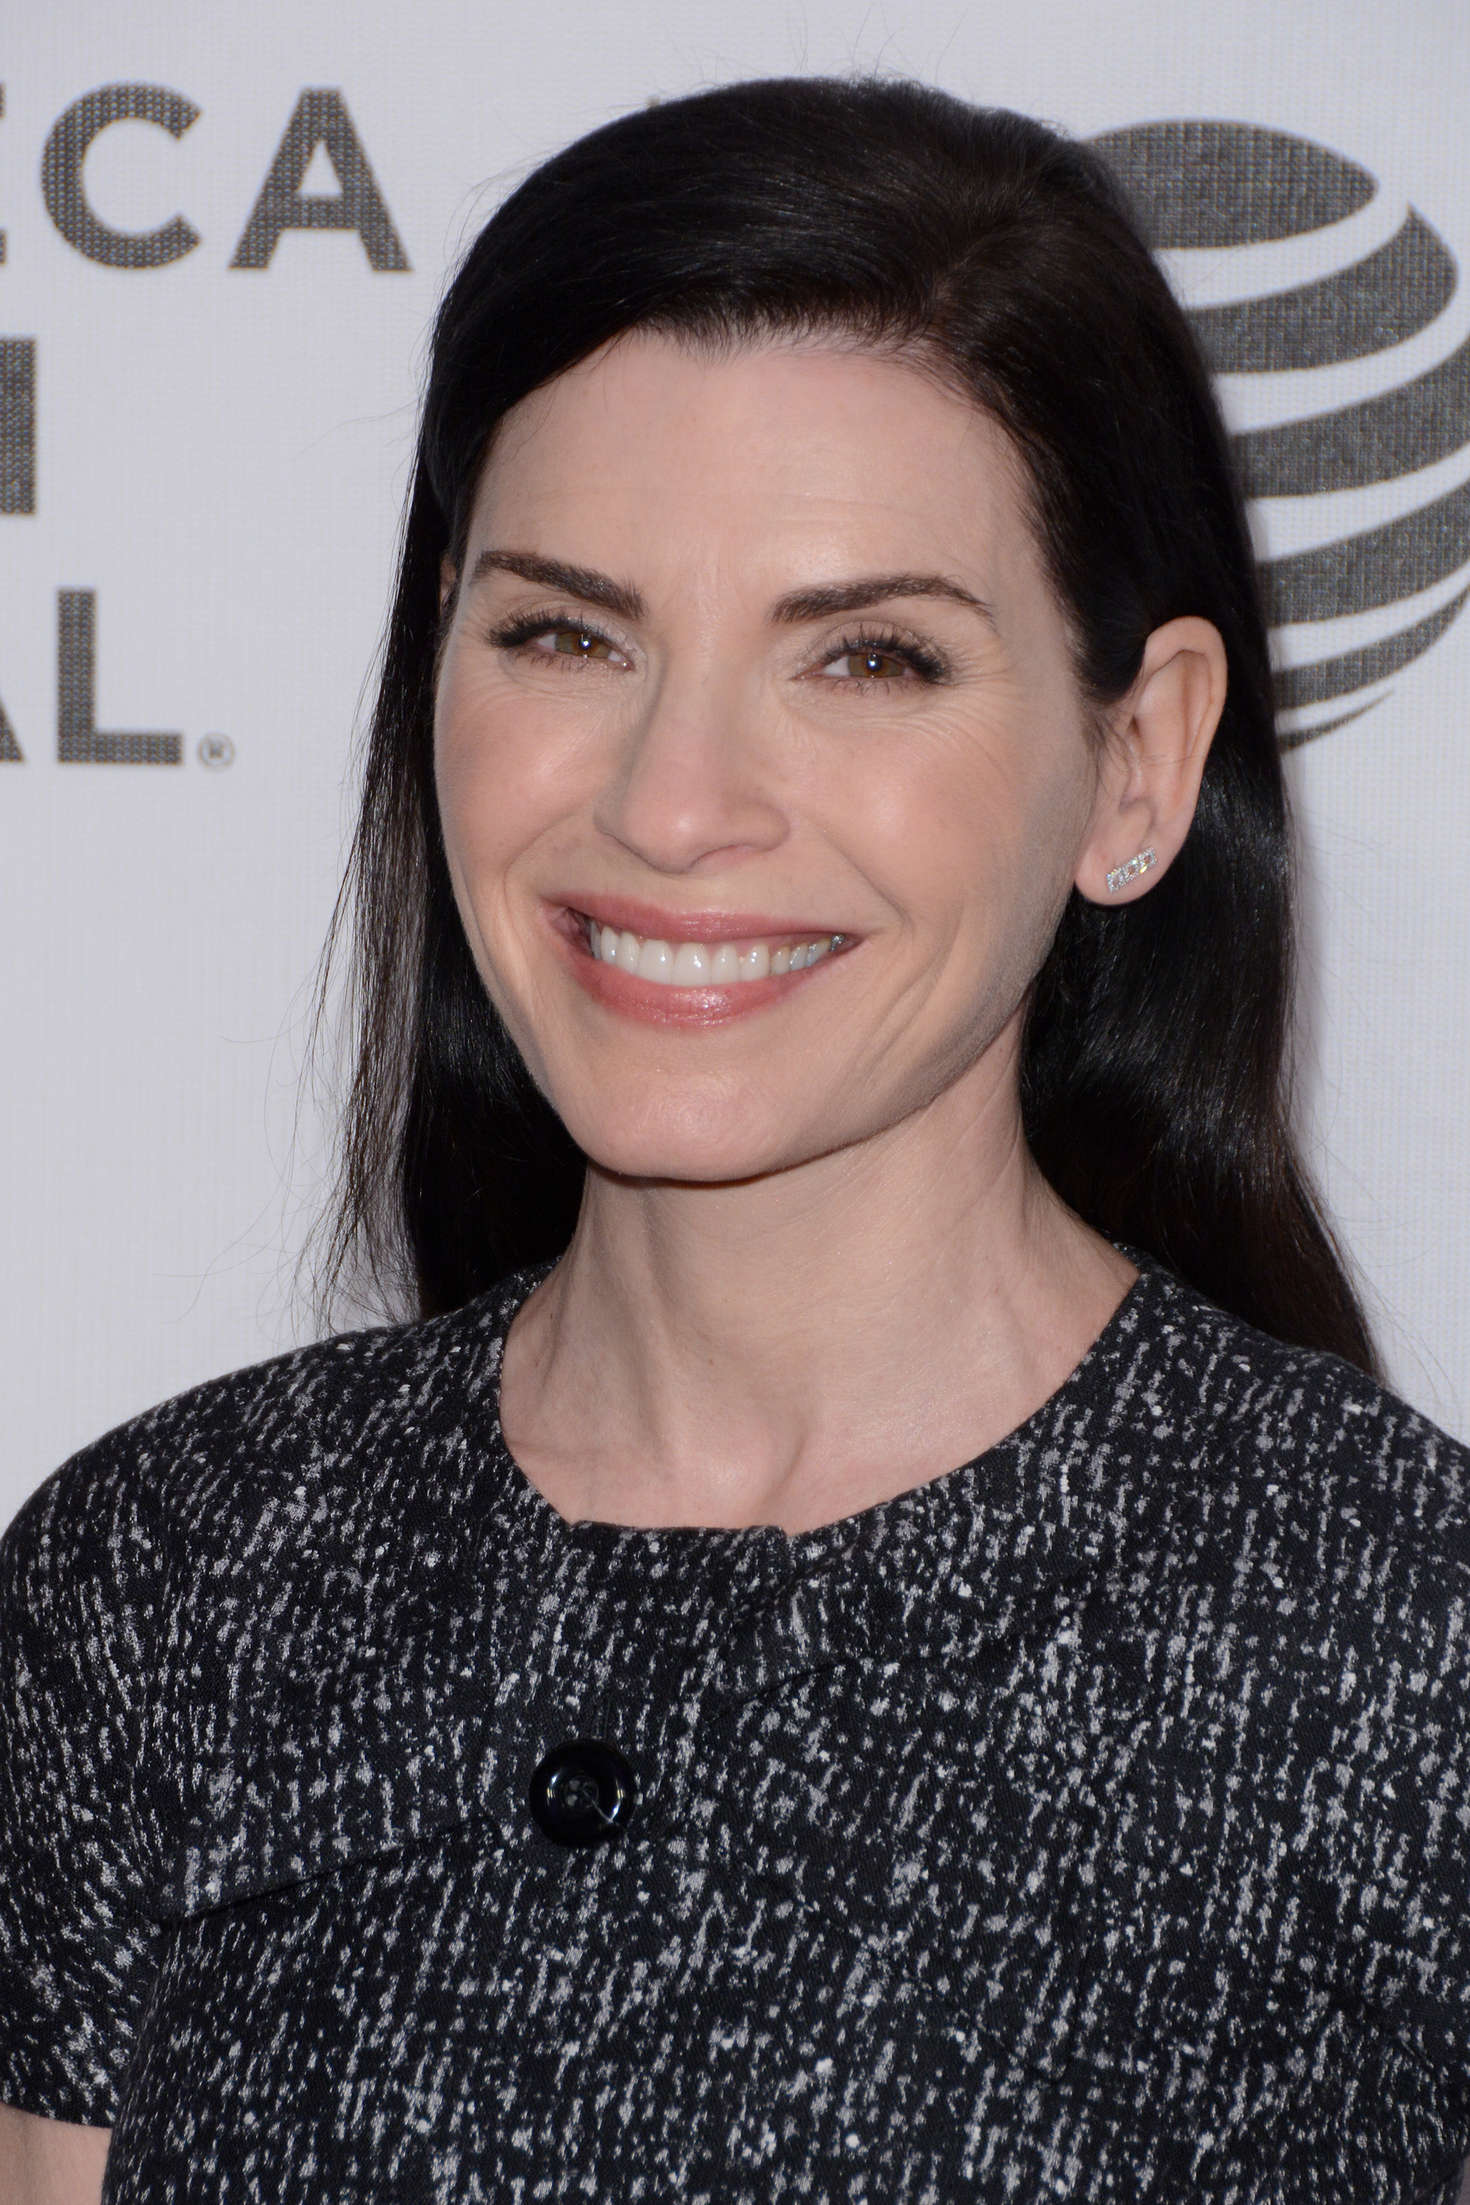 Julianna Margulies 2016 : Julianna Margulies: The Good Wife Premiere at 2016 Tribeca Film Festival -03